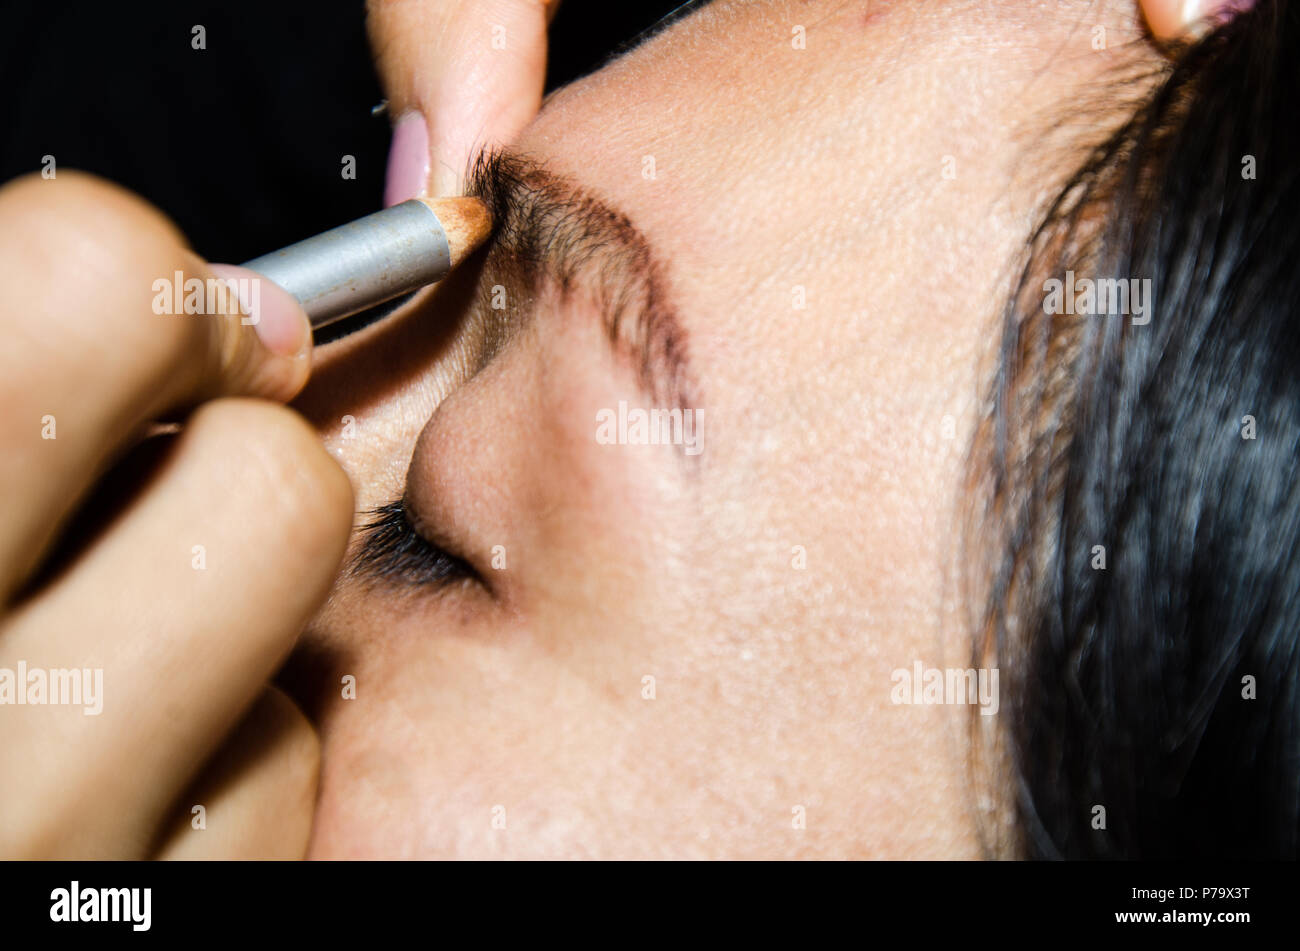 Permanent makeup tattooing of eyebrows. Cosmetologist applying permanent make up on eyebrows - eyebrow tattoo Stock Photo